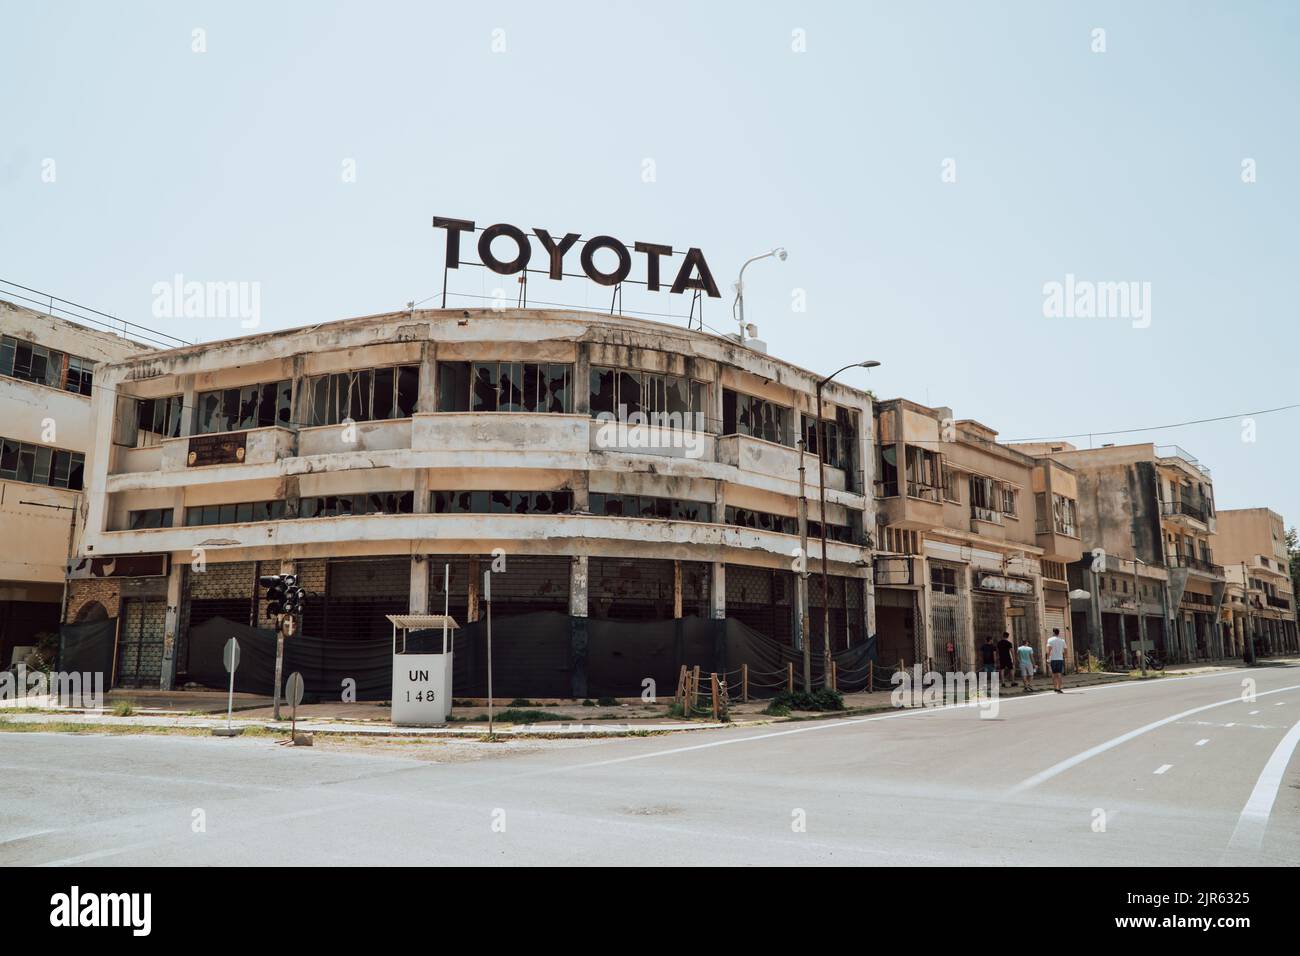 The abandoned Toyota dealership in the ghost town resort of Varosha Stock Photo